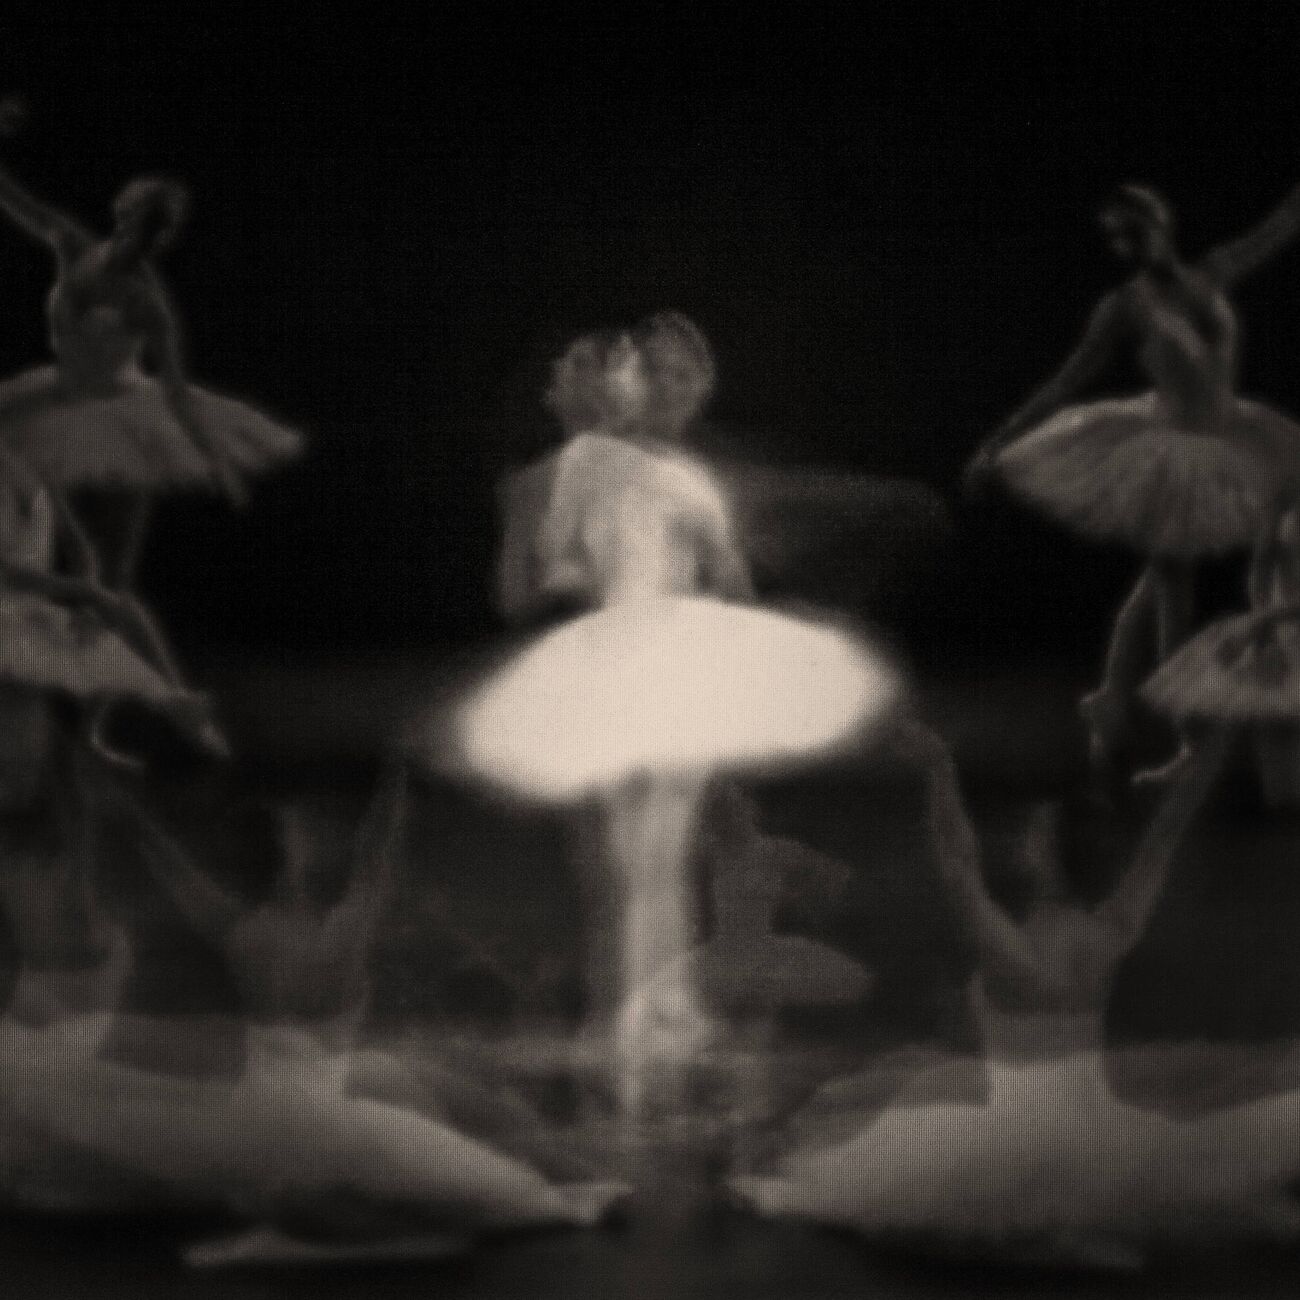 Ghost Opera, Study 32, The Swan Lake, Berlin, Germany. April 1998. Ref-11468 - Denis Olivier Photography